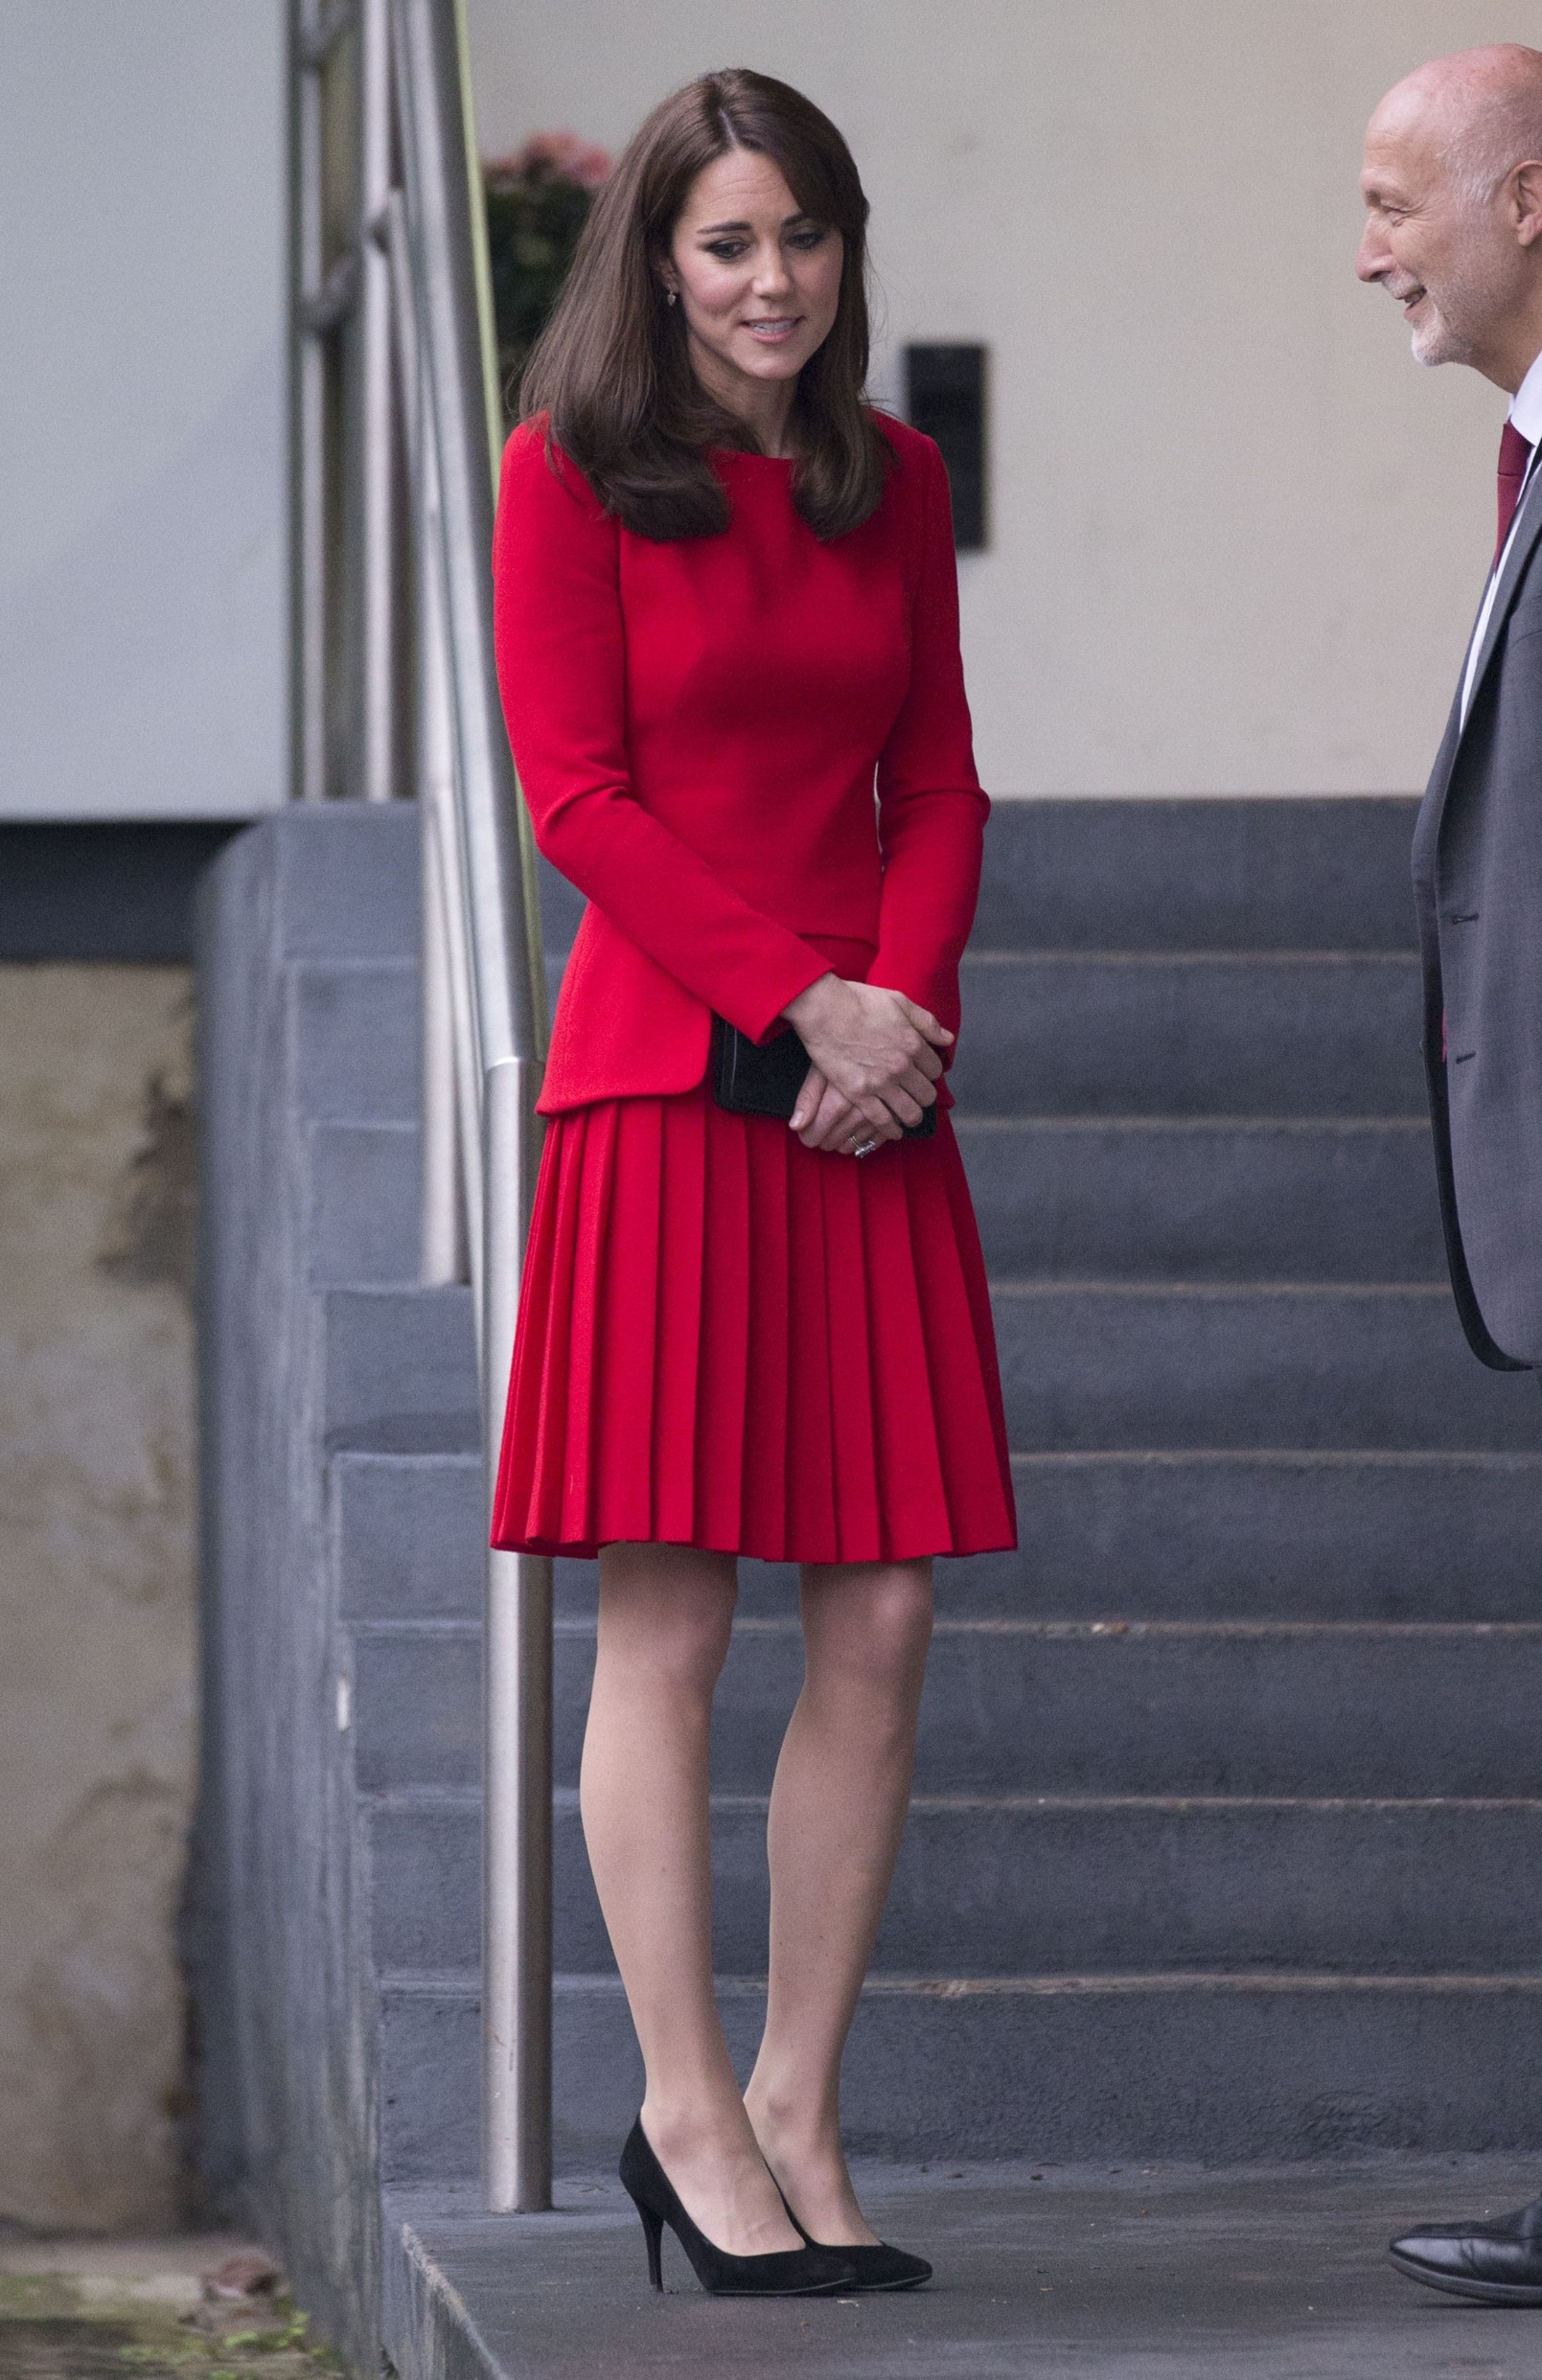 146039, Catherine, Duchess of Cambridge seen at the Anna Freud Centre family school Christmas party in London. London, United Kingdom - Tuesday December 15, 2015. UK, FRANCE, AUS, NZ, CHINA, HONG KONG, TAIWAN, SPAIN & ITALY OUT, Image: 269235099, License: Rights-managed, Restrictions: RESTRICTIONS APPLY, Model Release: no, Credit line: i-Images, PacificCoastNews / Pacific coast news / Profimedia